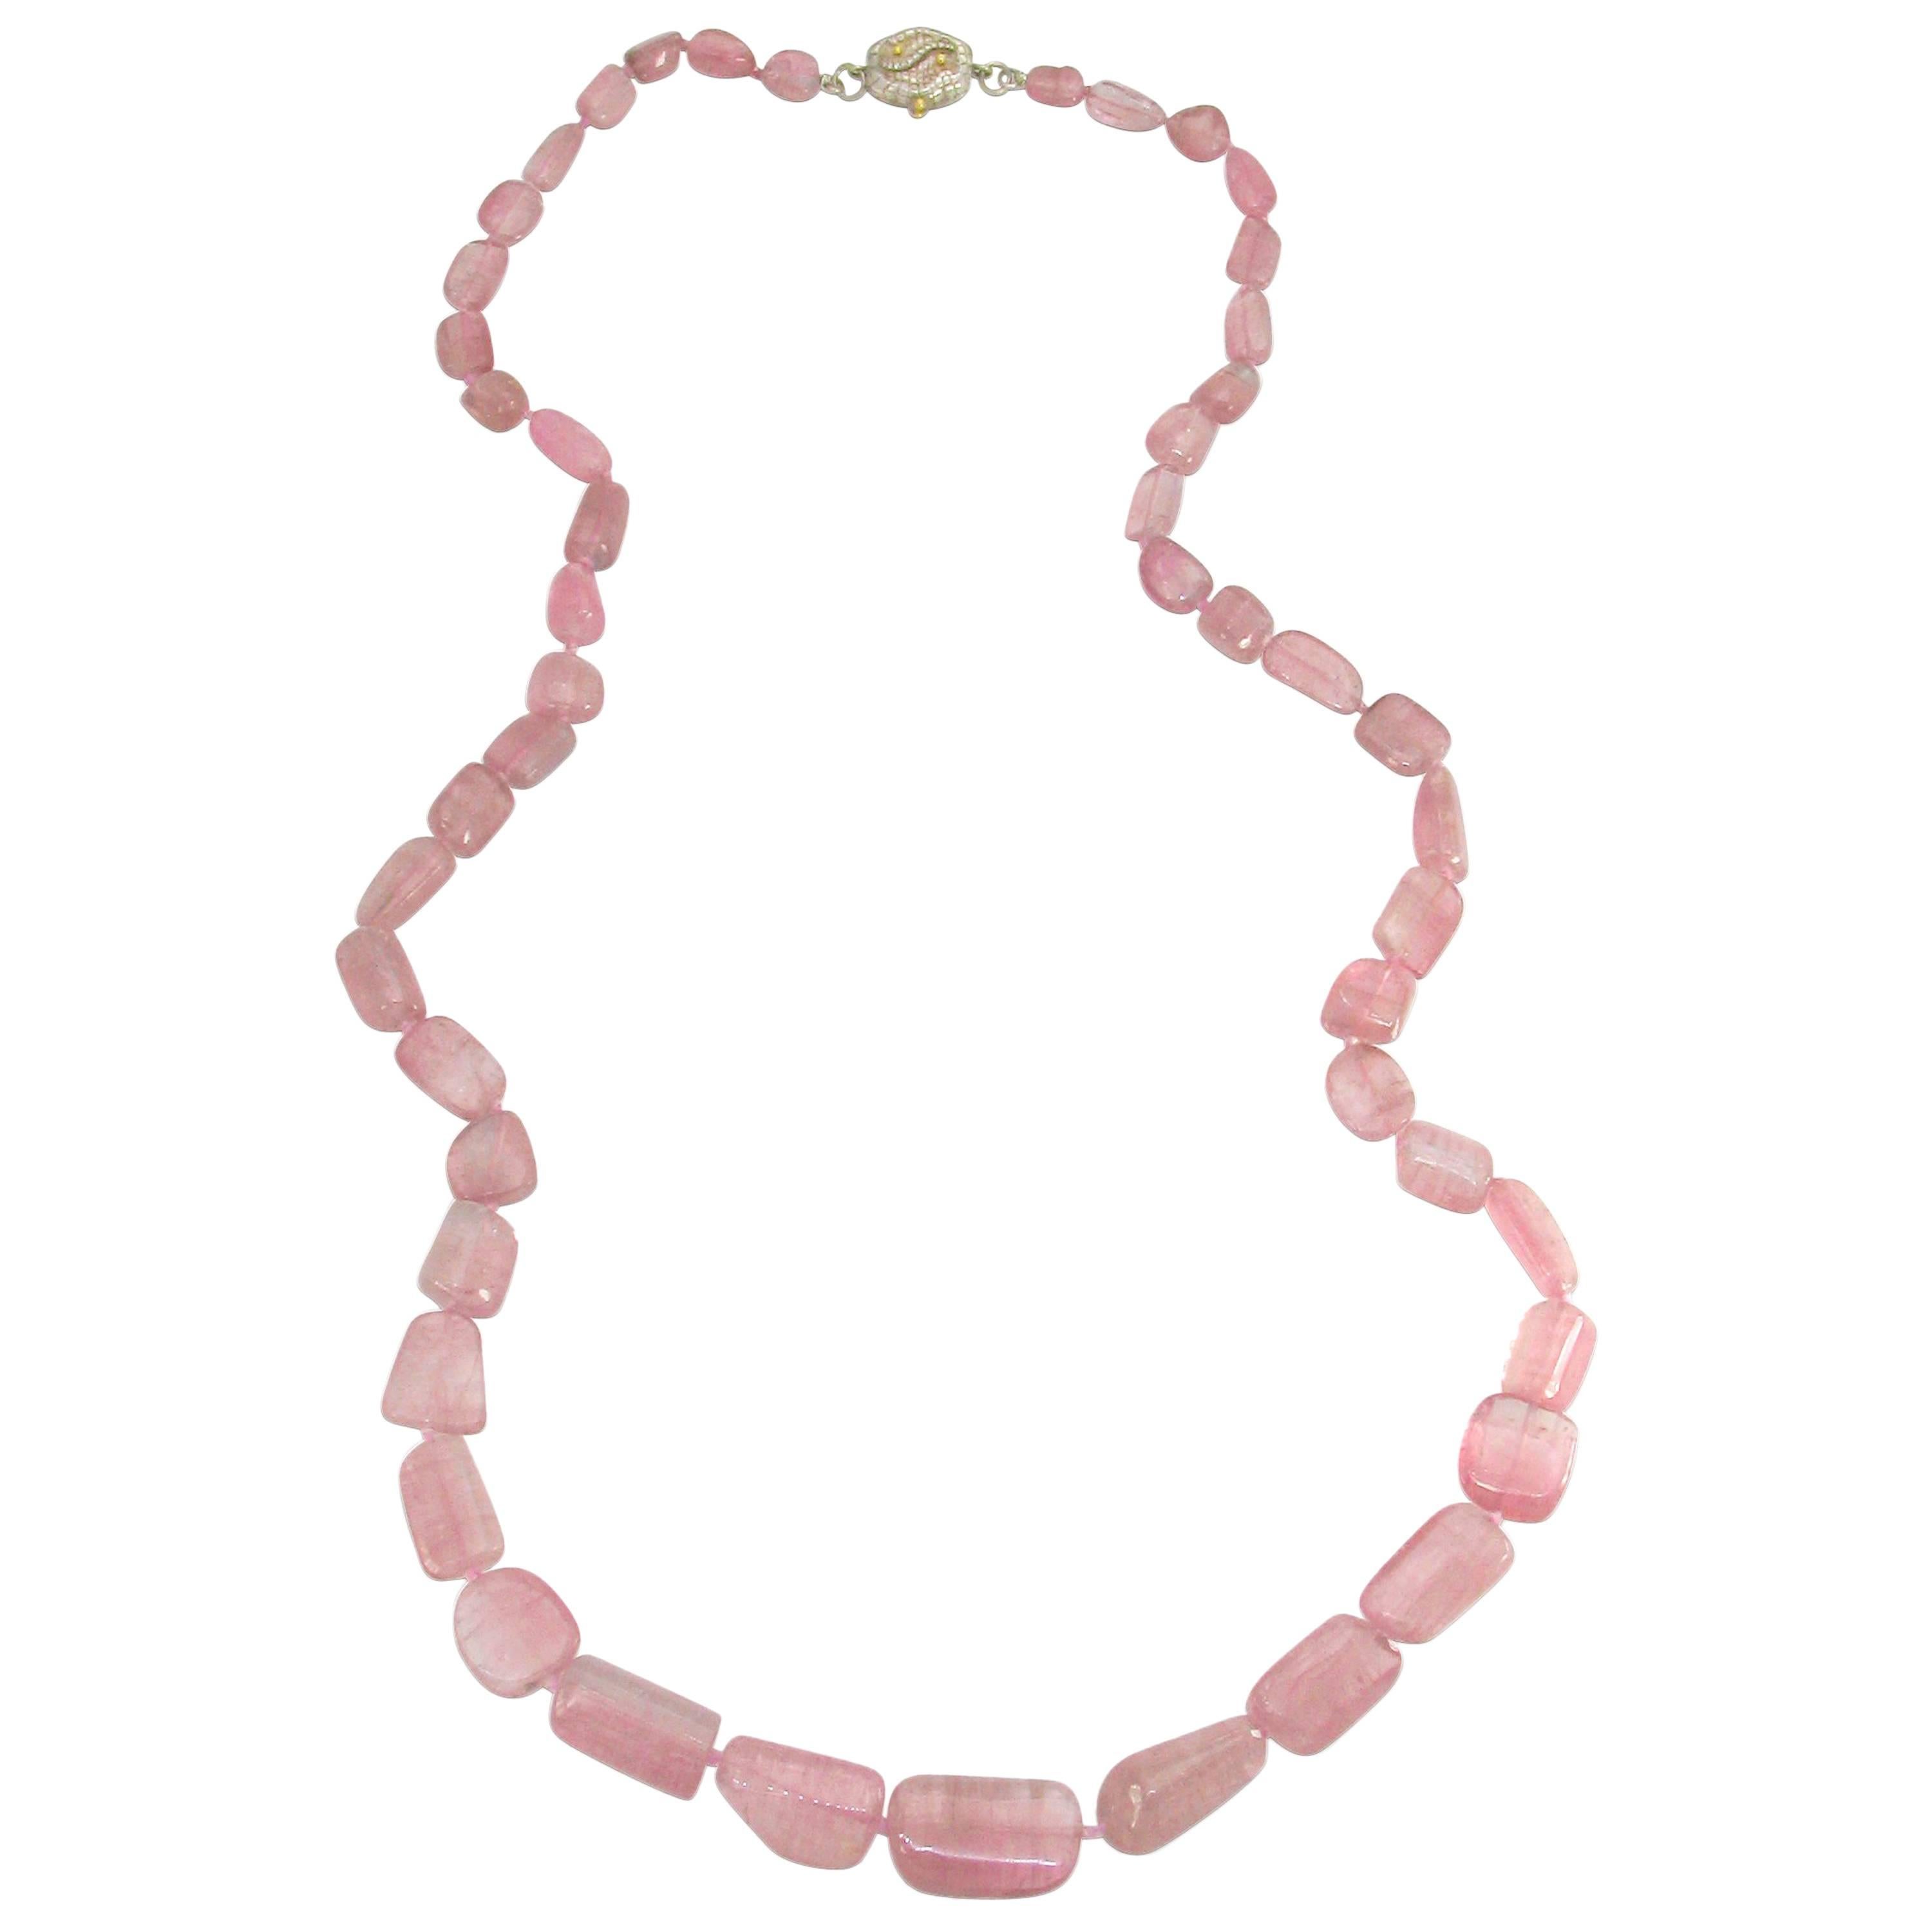 Pink Tourmaline Necklace with Victor Velyan Clamshell Clasp